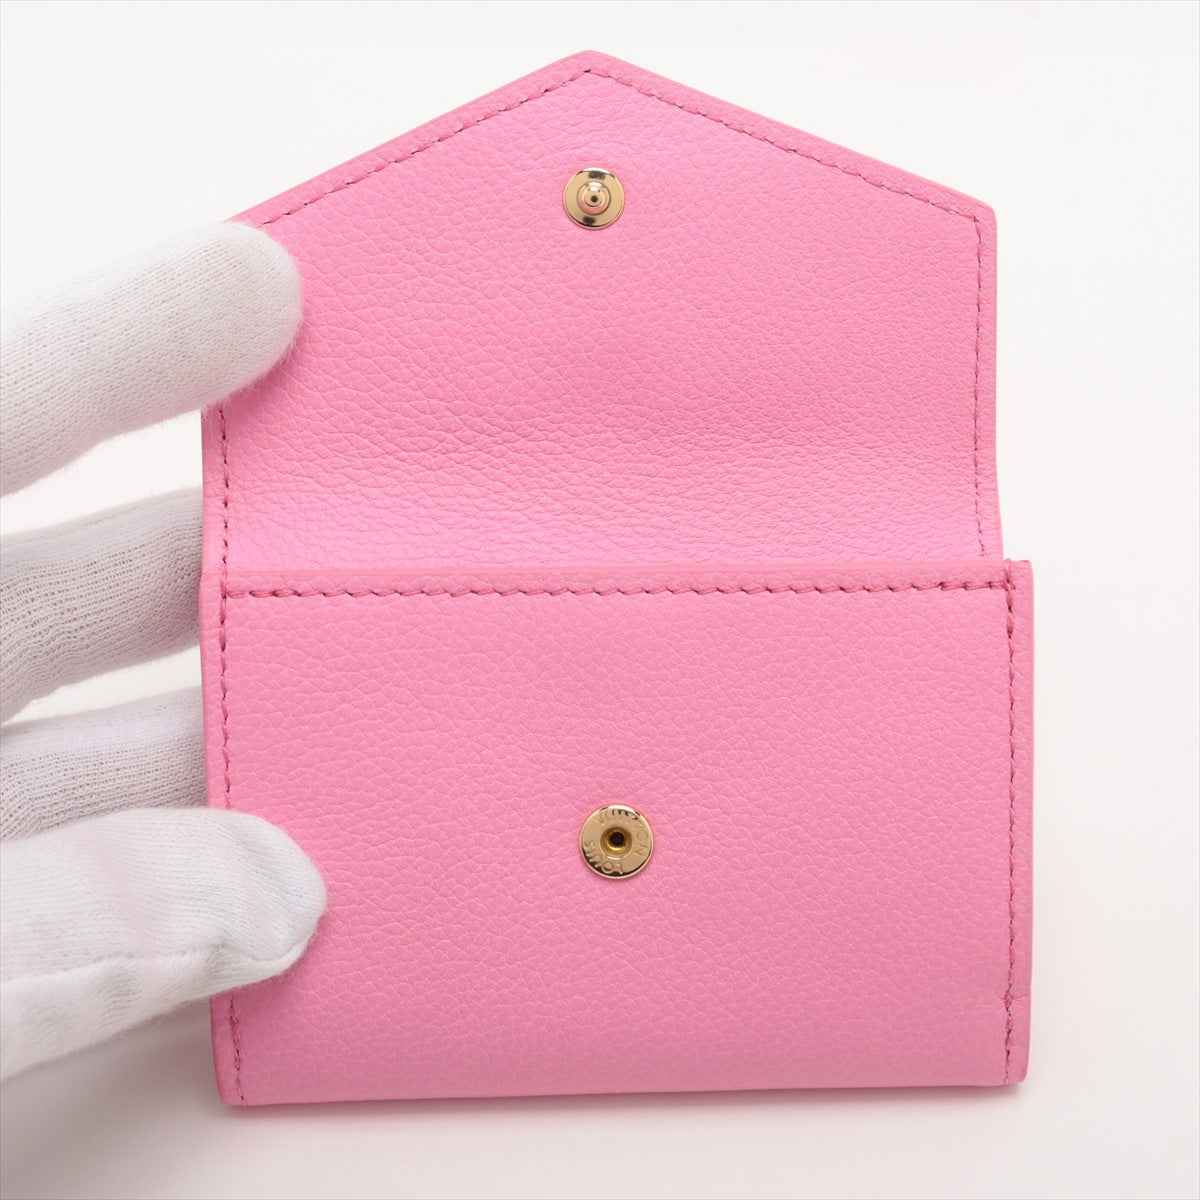 Louis Vuitton Taurillon Portefeuille Lock Mini Model number Pink Compact Wallet M82436 Personal engraving